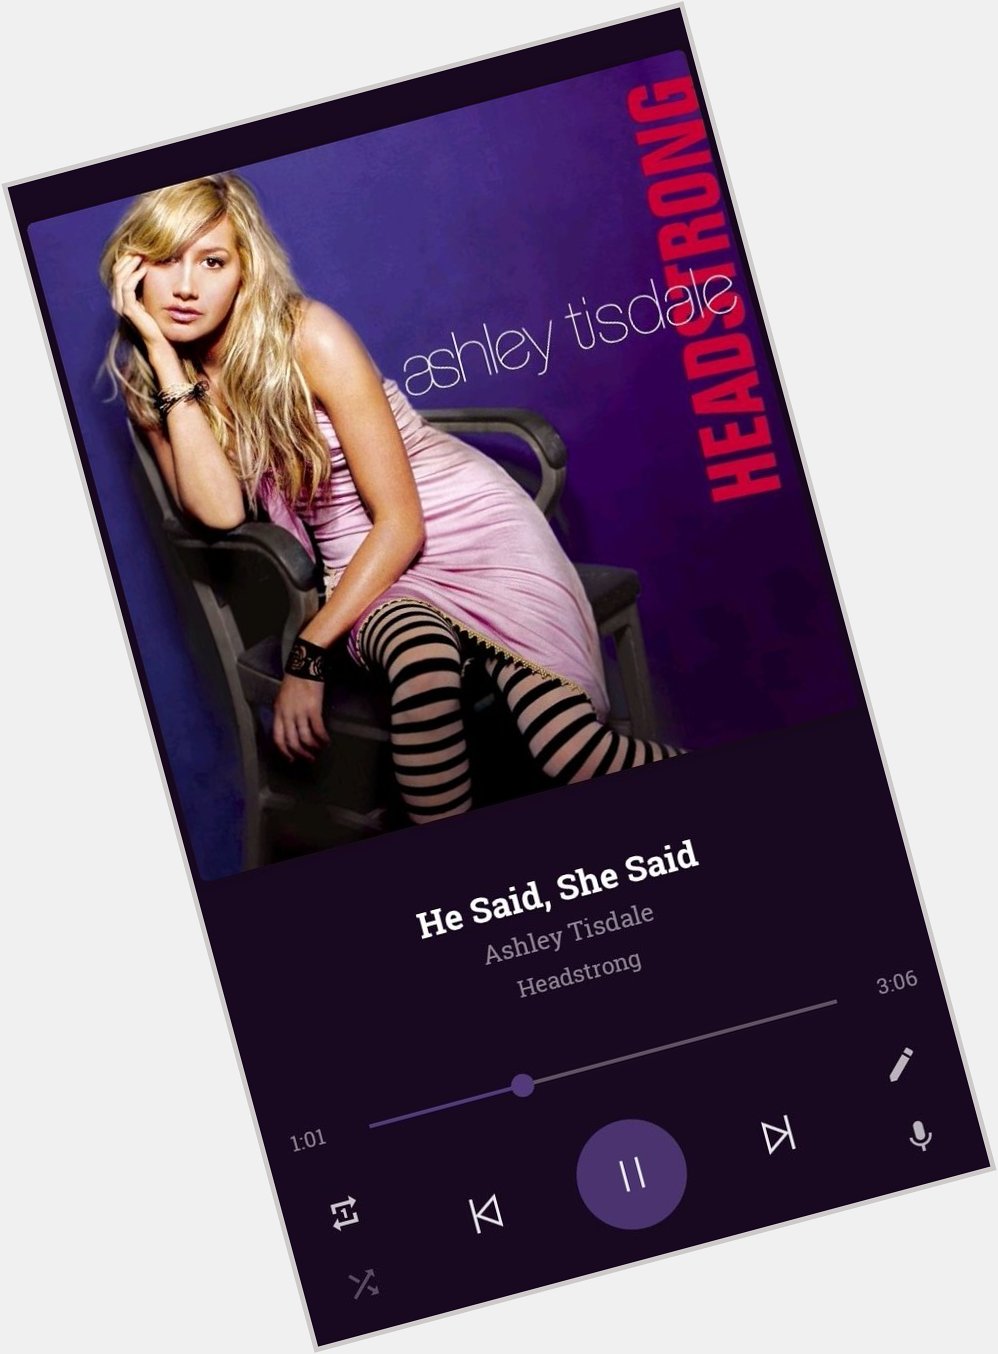 Happy birthday Ashley Tisdale. This song will forever be a BOP. 